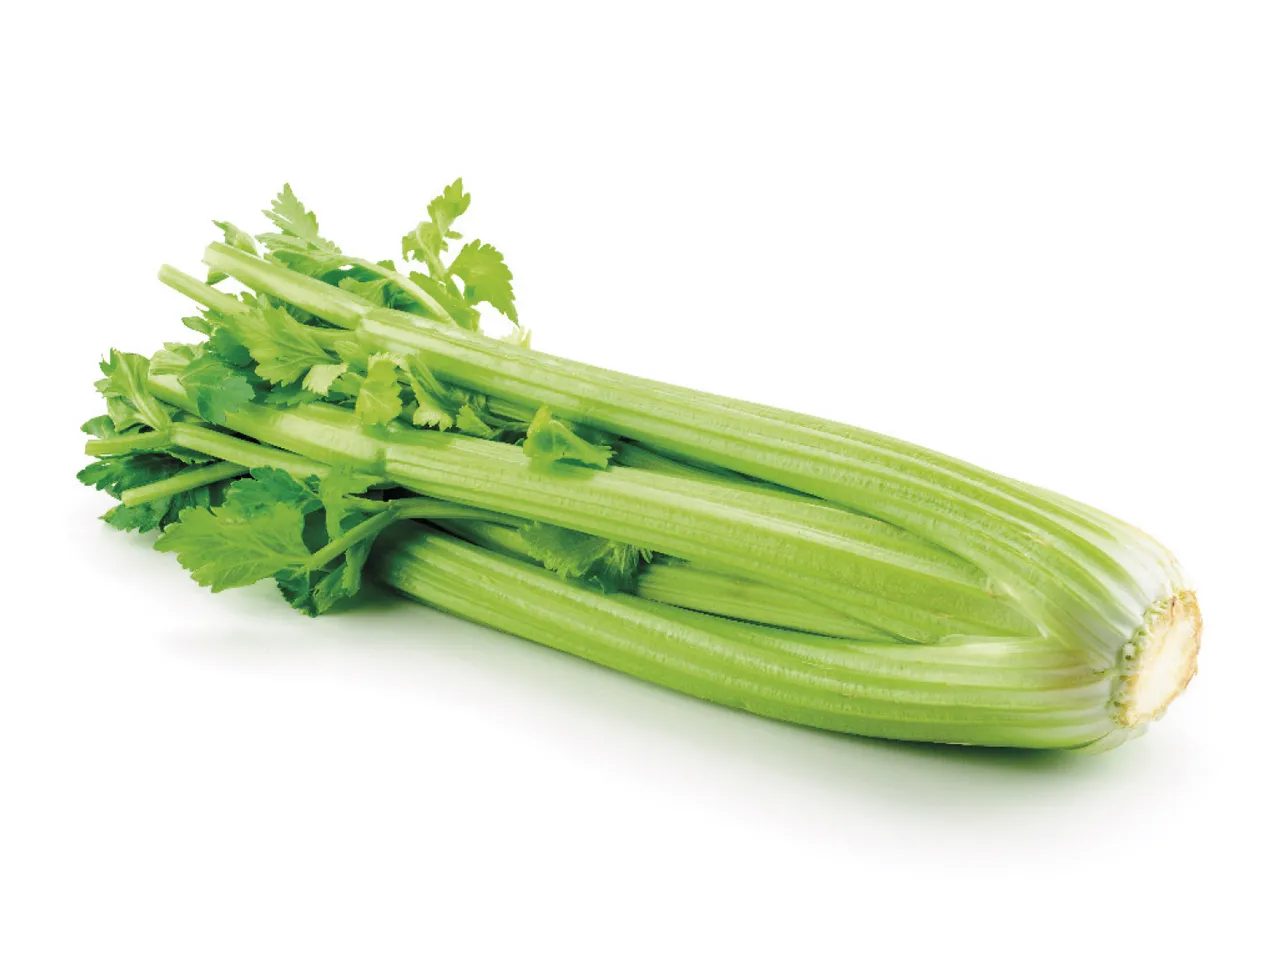 Go to full screen view: Celery - Image 1